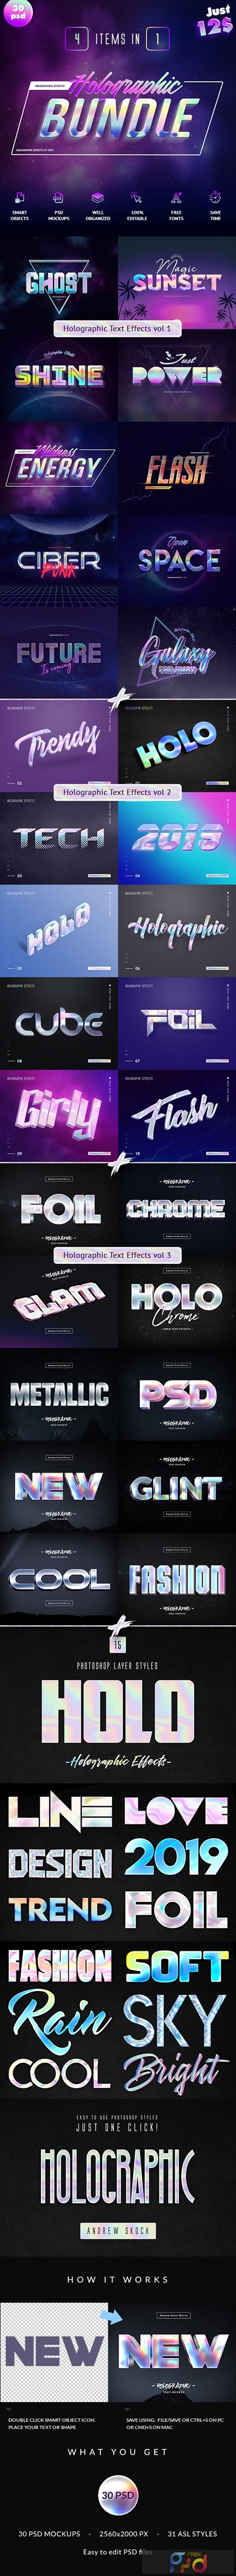 Holographic Text Effects Bundle 25047134 1